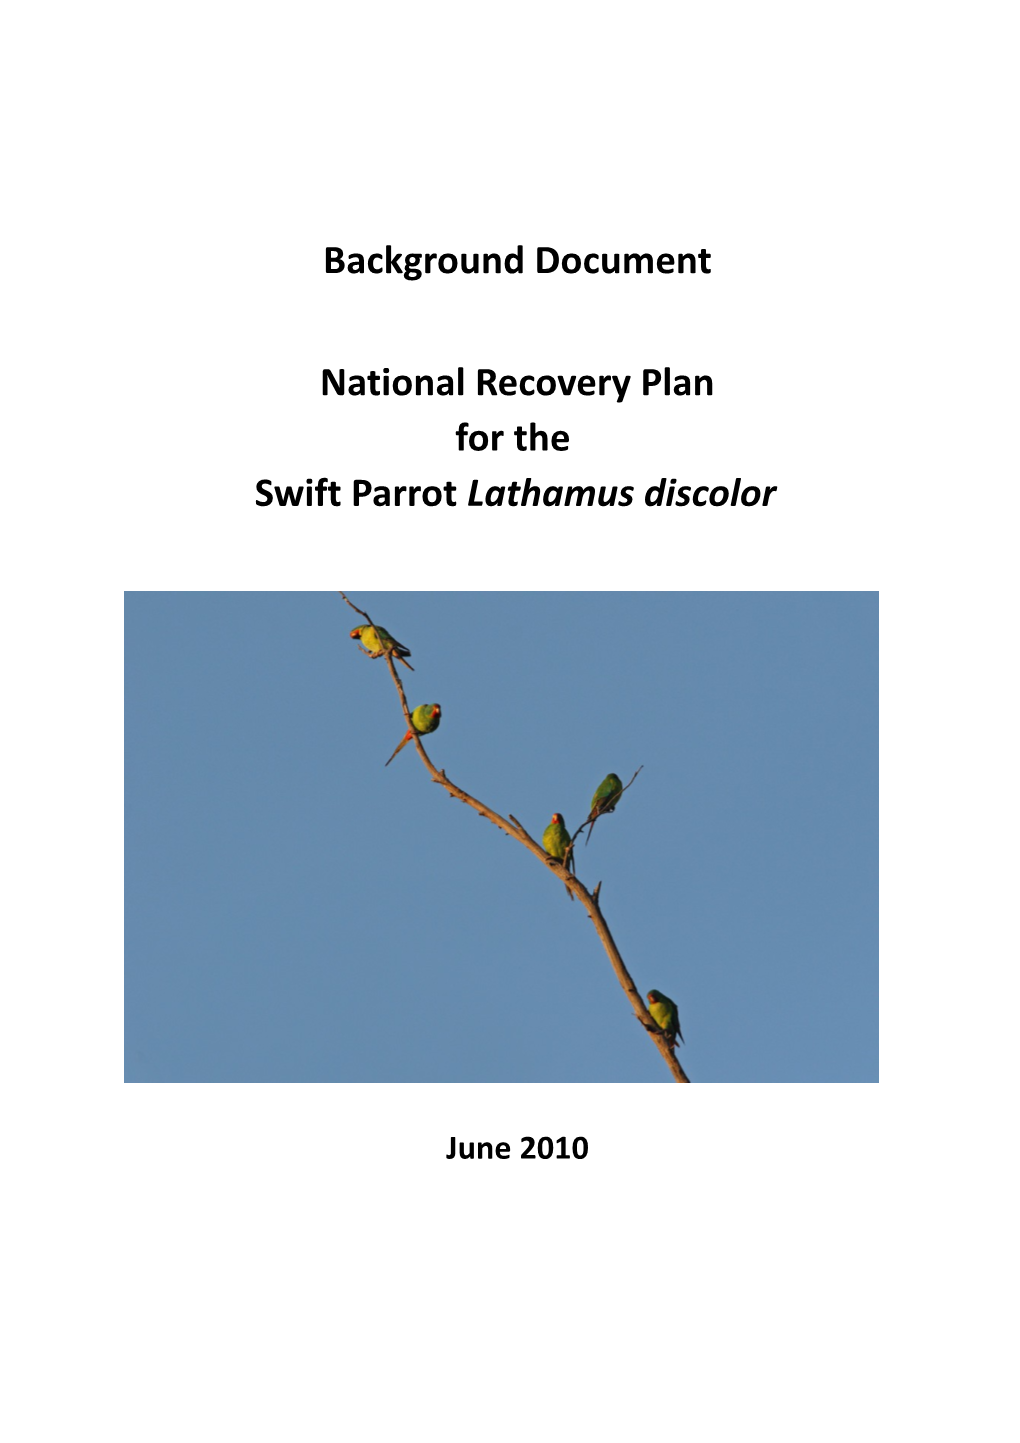 Background Document National Recovery Plan for the Swift Parrot Lathamus Discolor